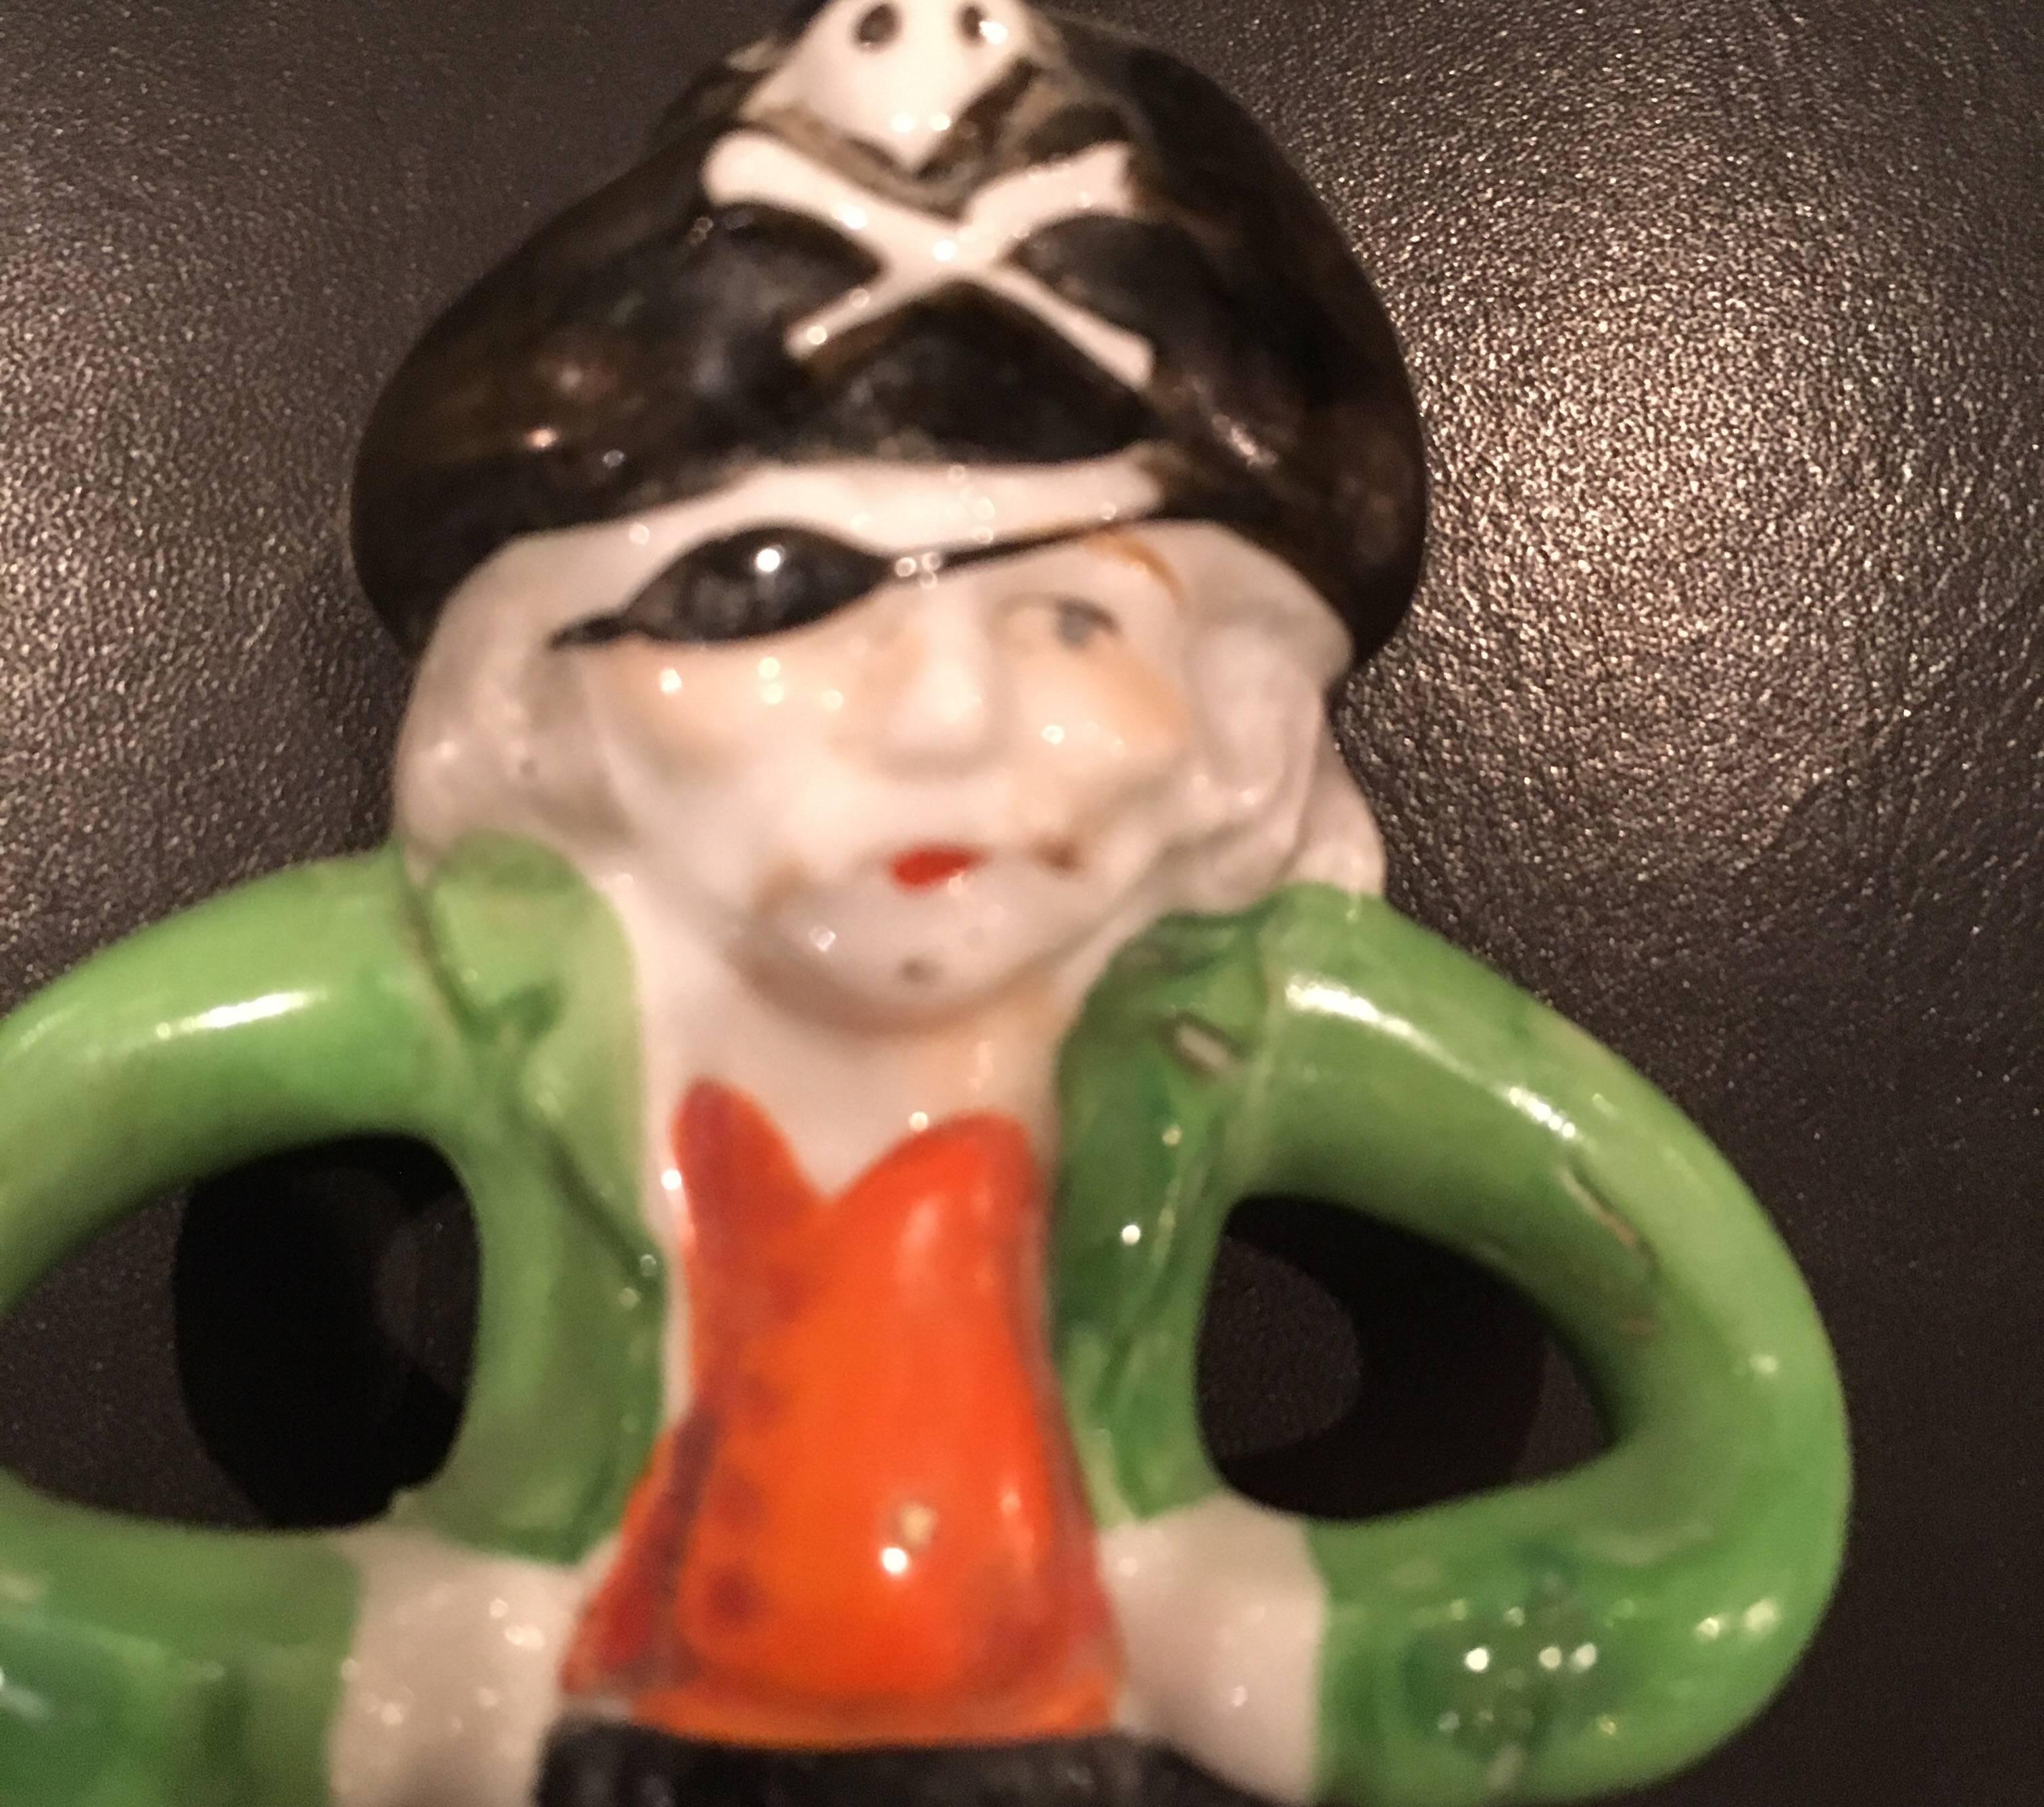 Pirate Toothbrush Holder from Japan 1